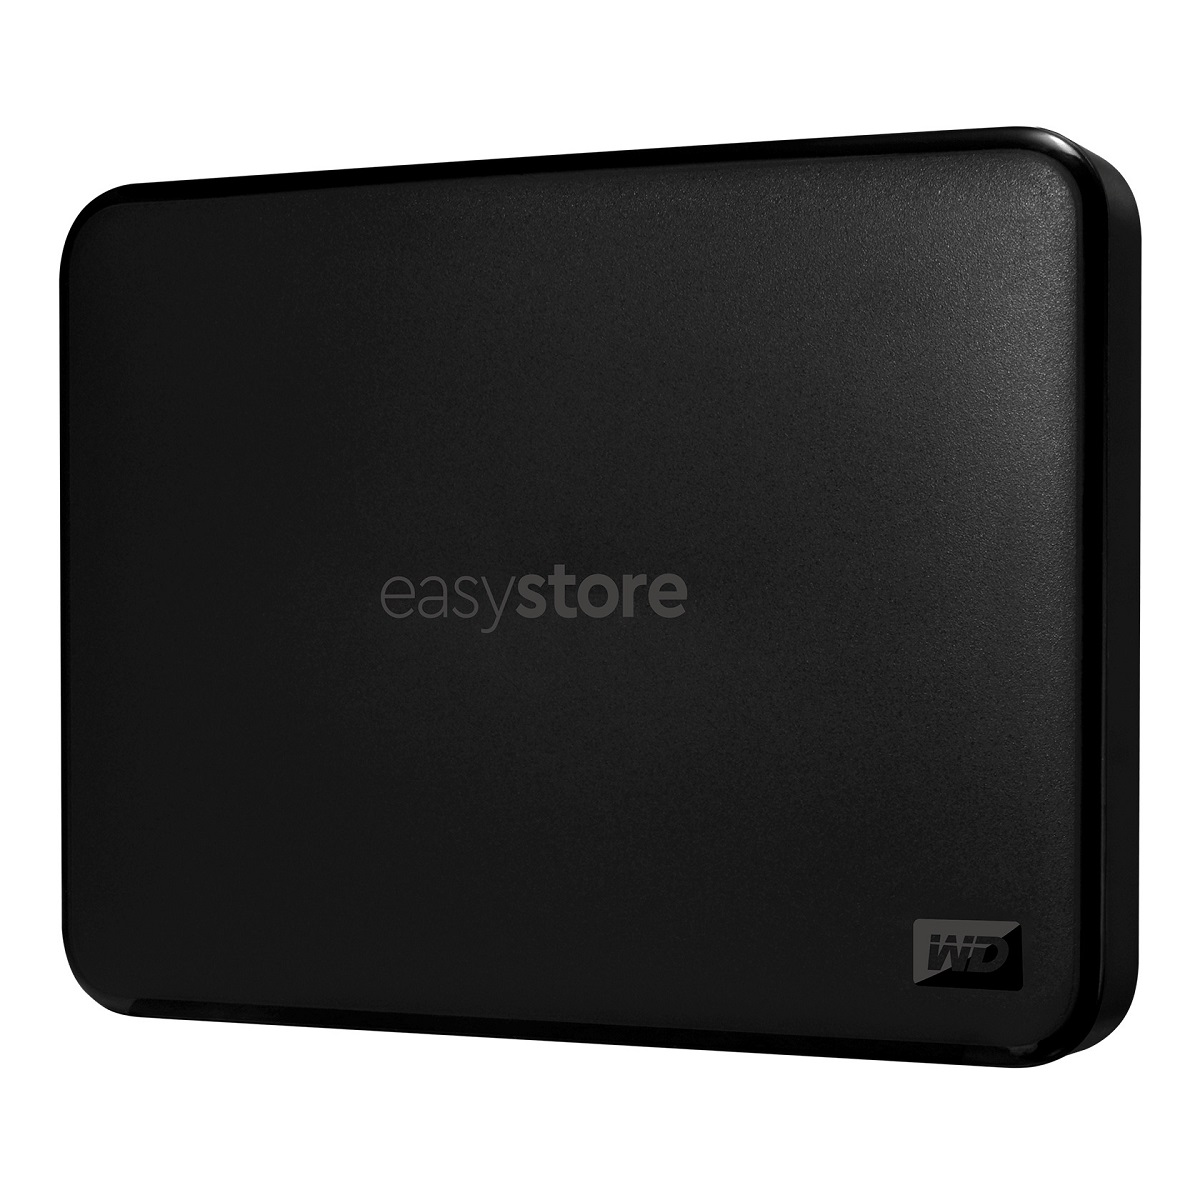 How To Use Easystore External Hard Drive